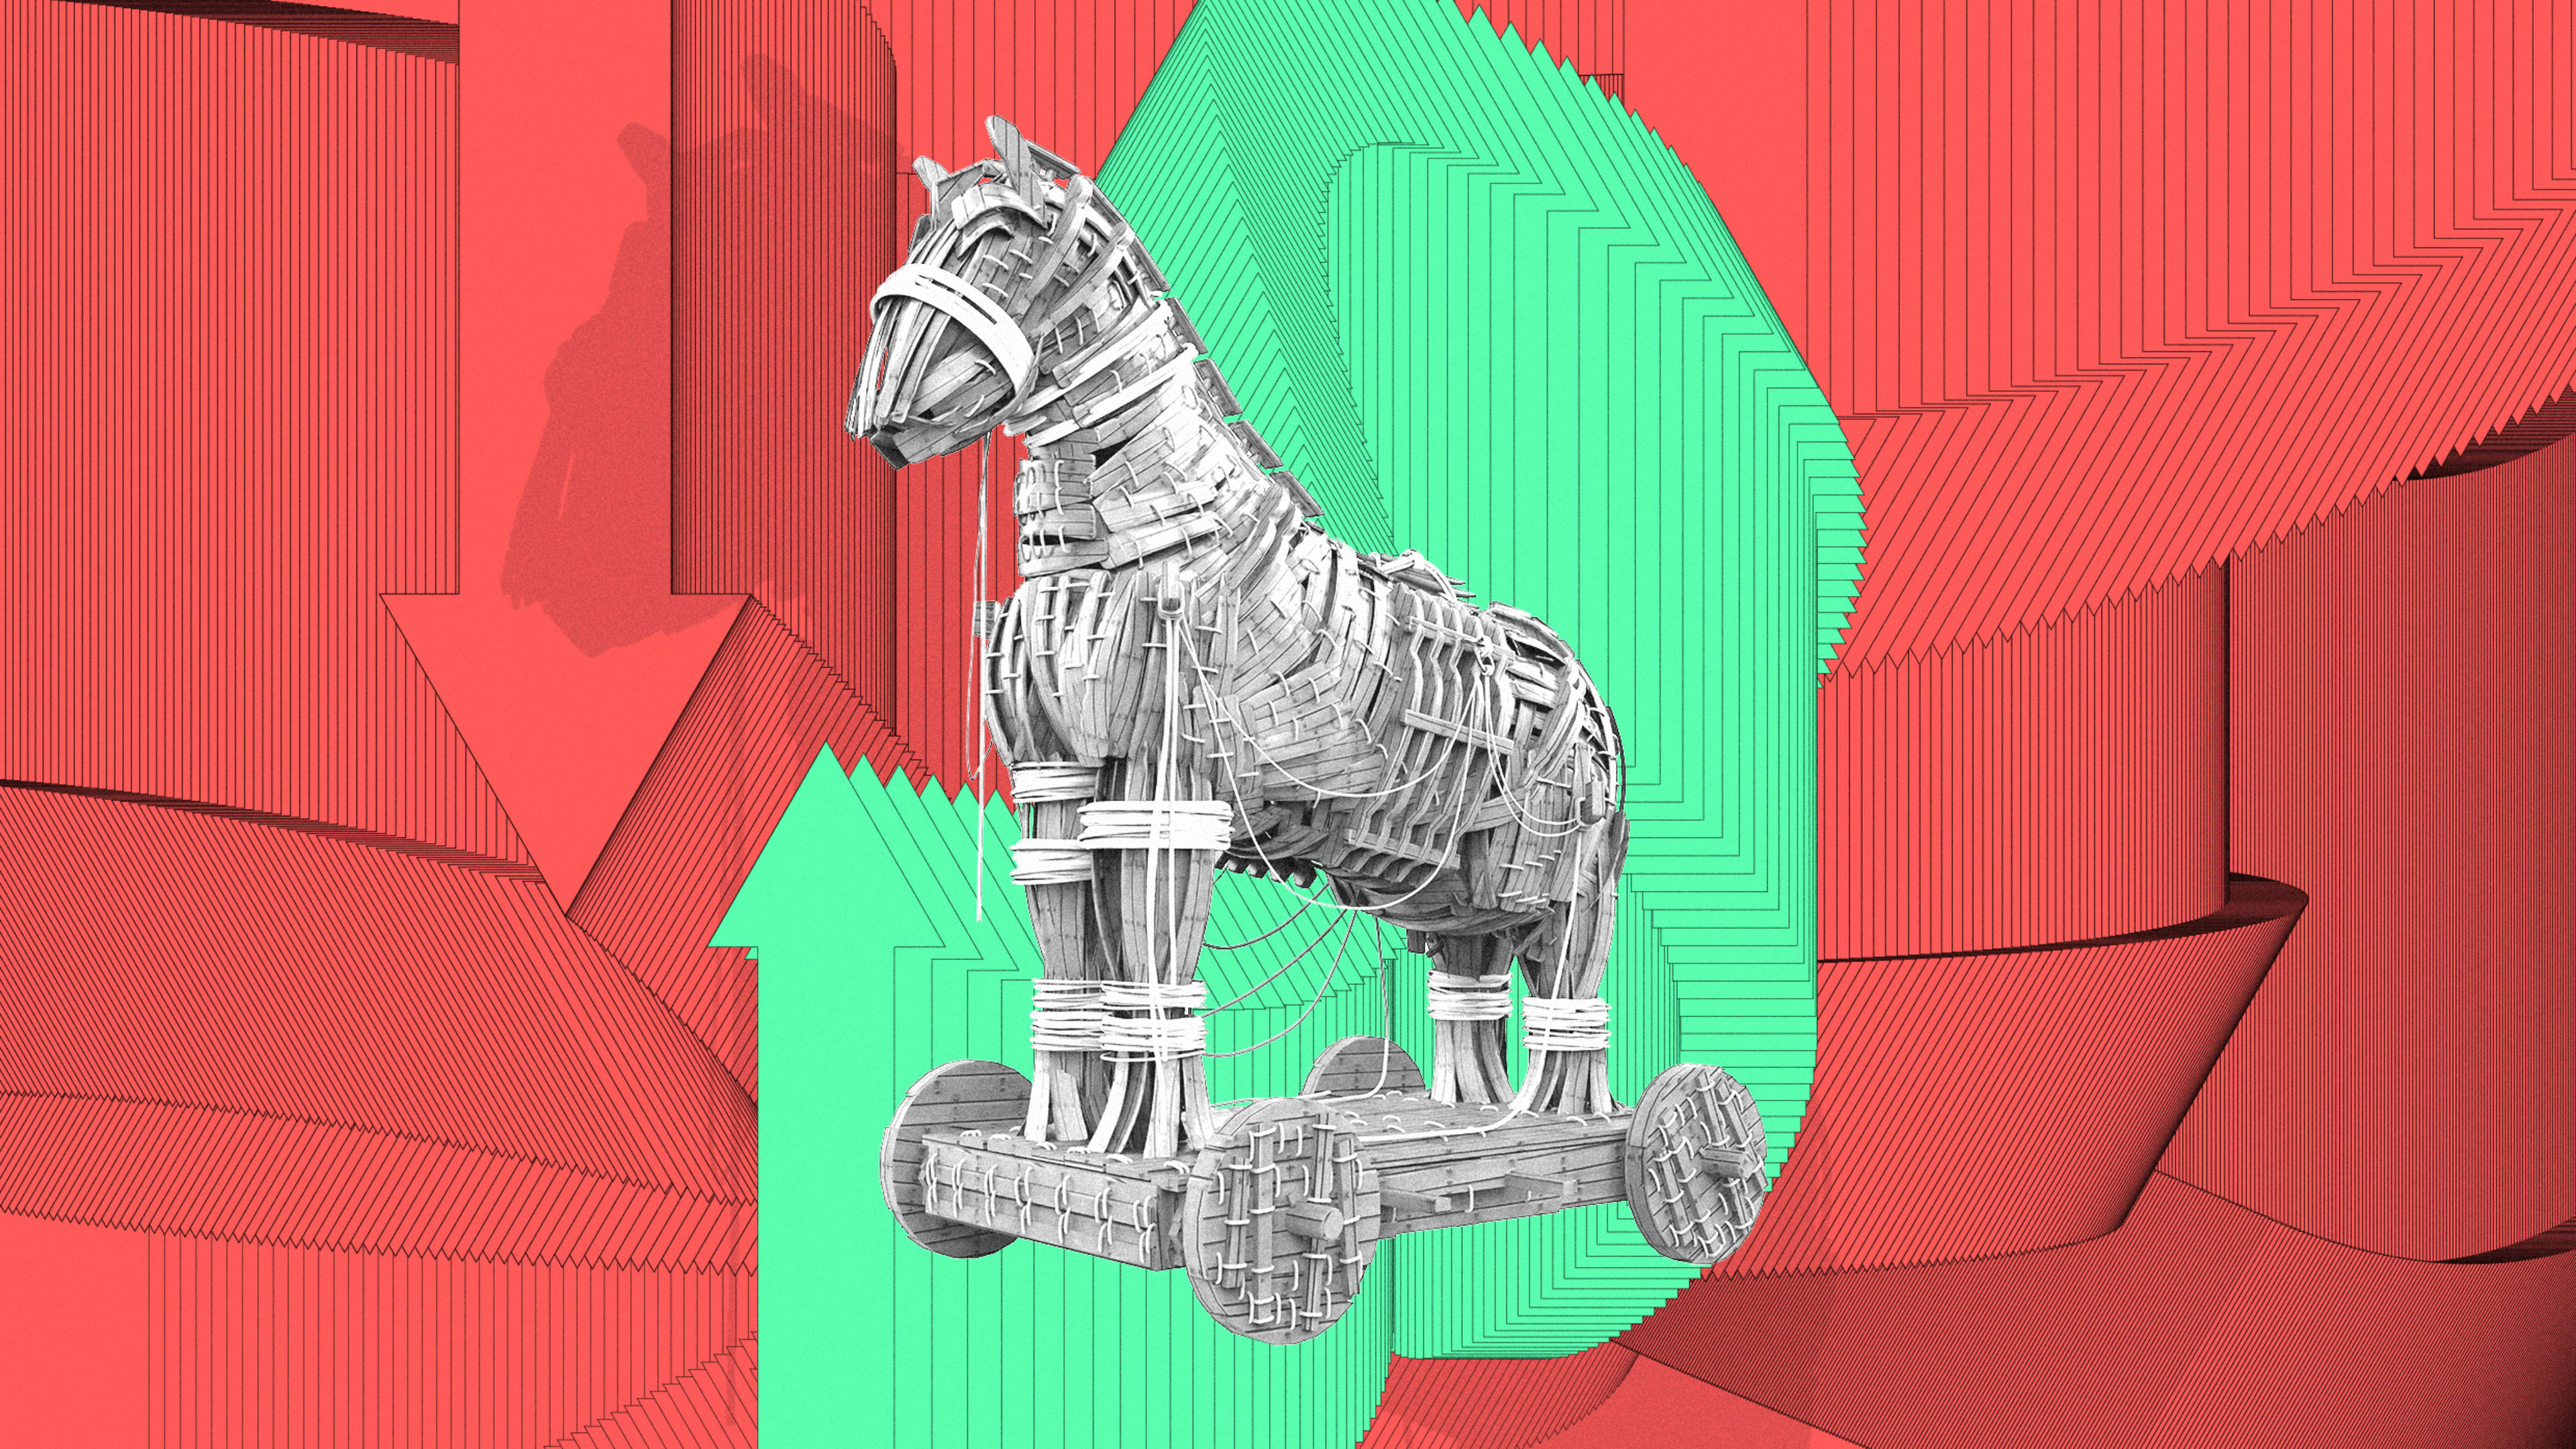 How to build a better capitalism: Be a Trojan horse